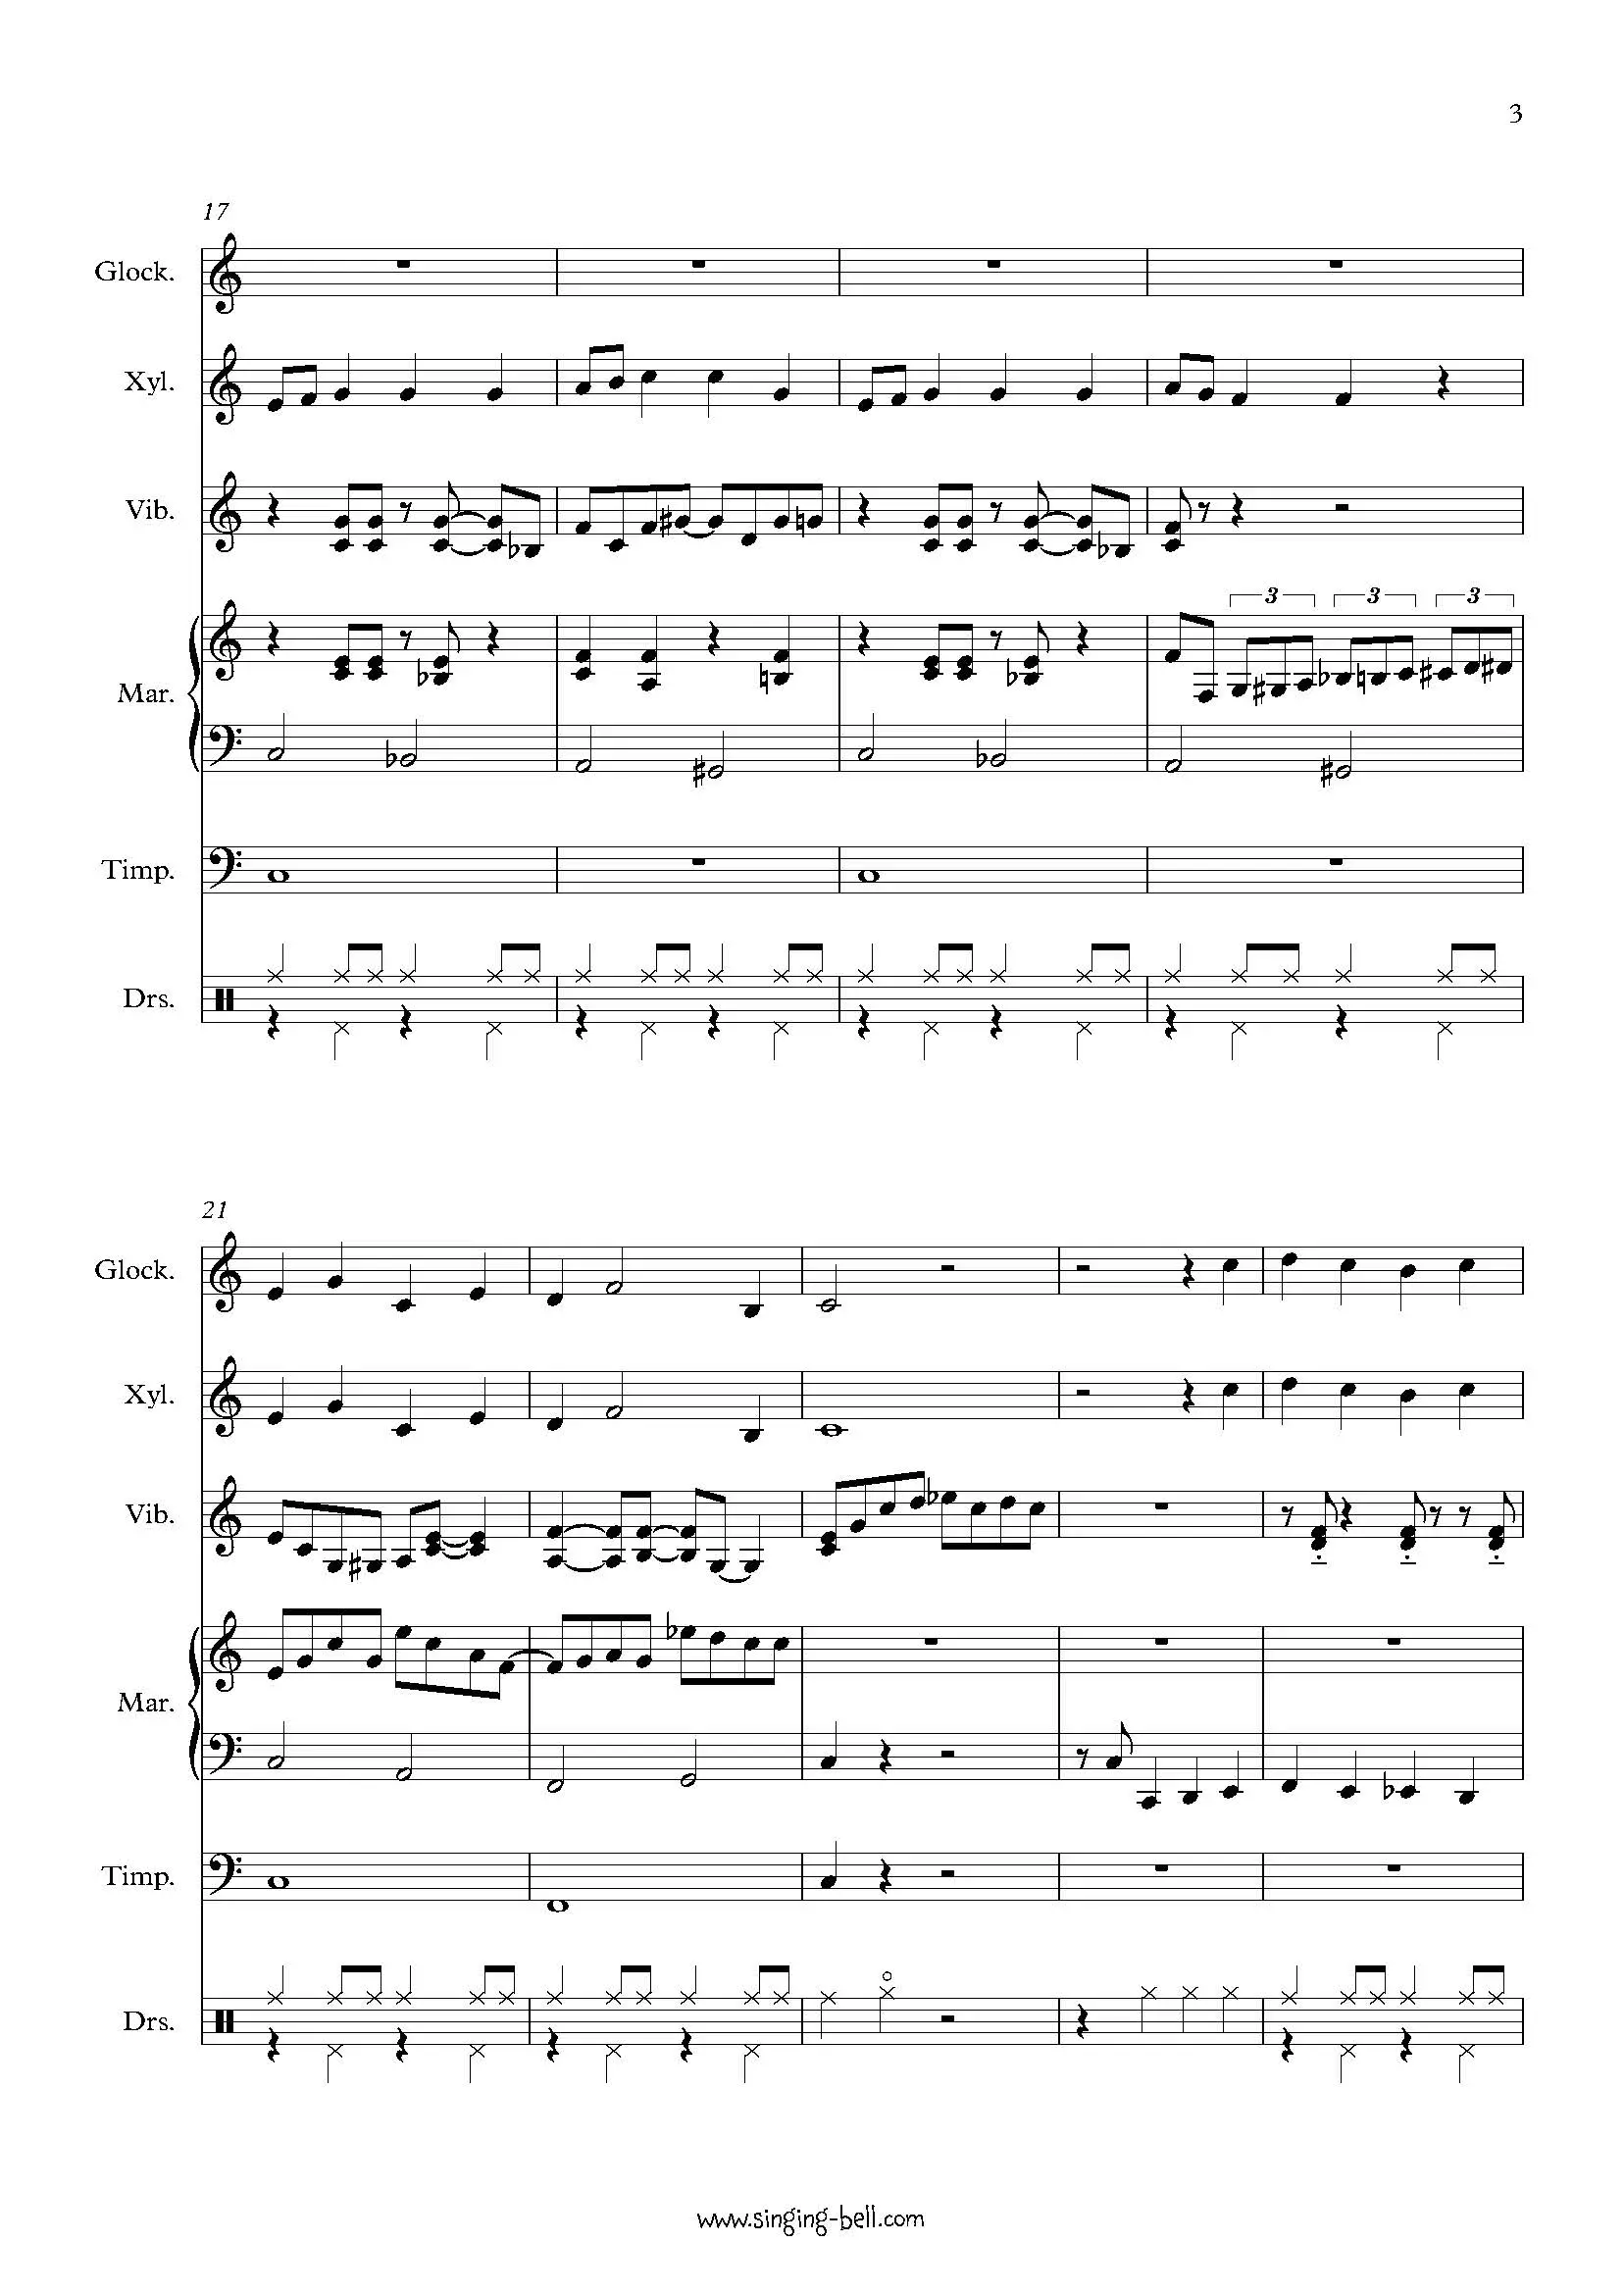 Santa Claus is Coming to Town - Percussion Sheet Music Page 3